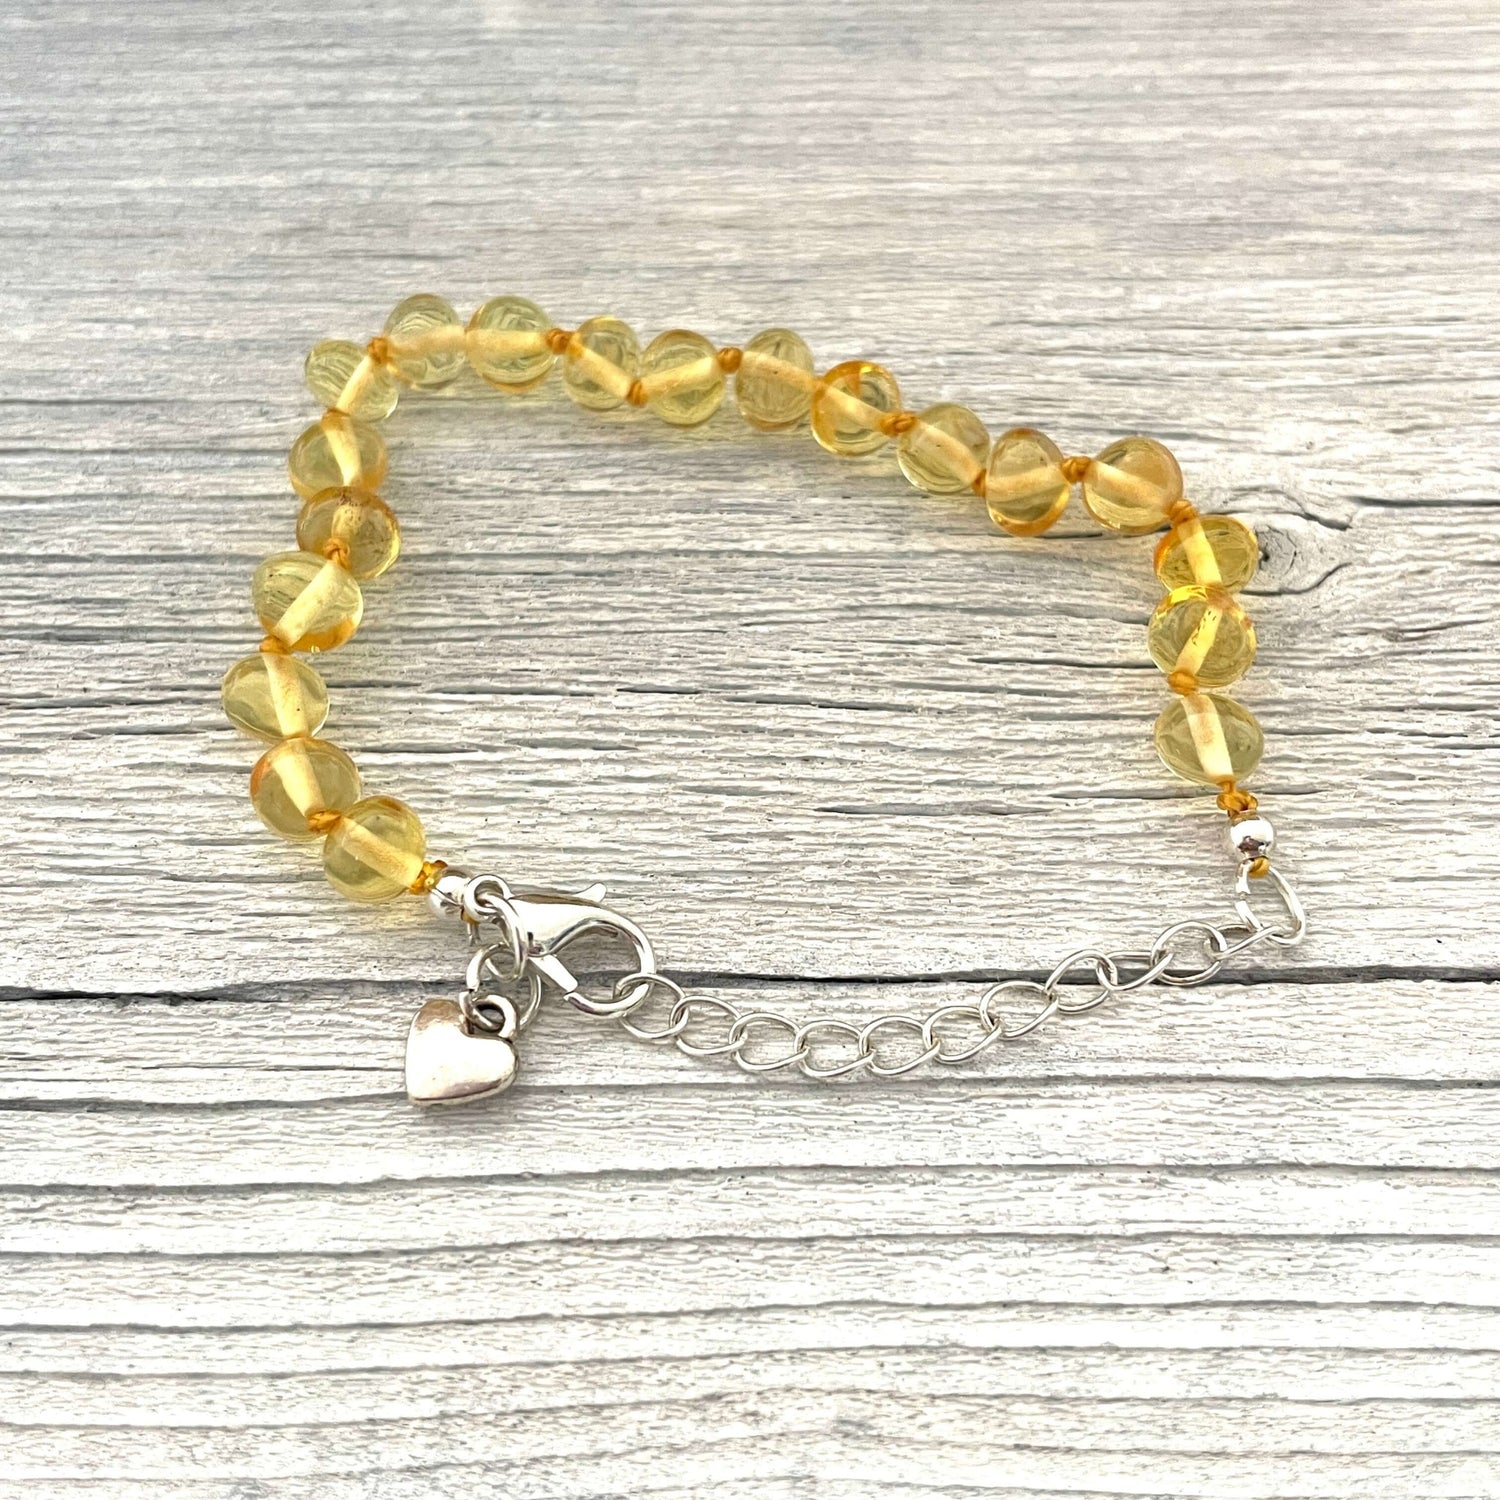 silver love heart charm on a round beaded amber bracelet